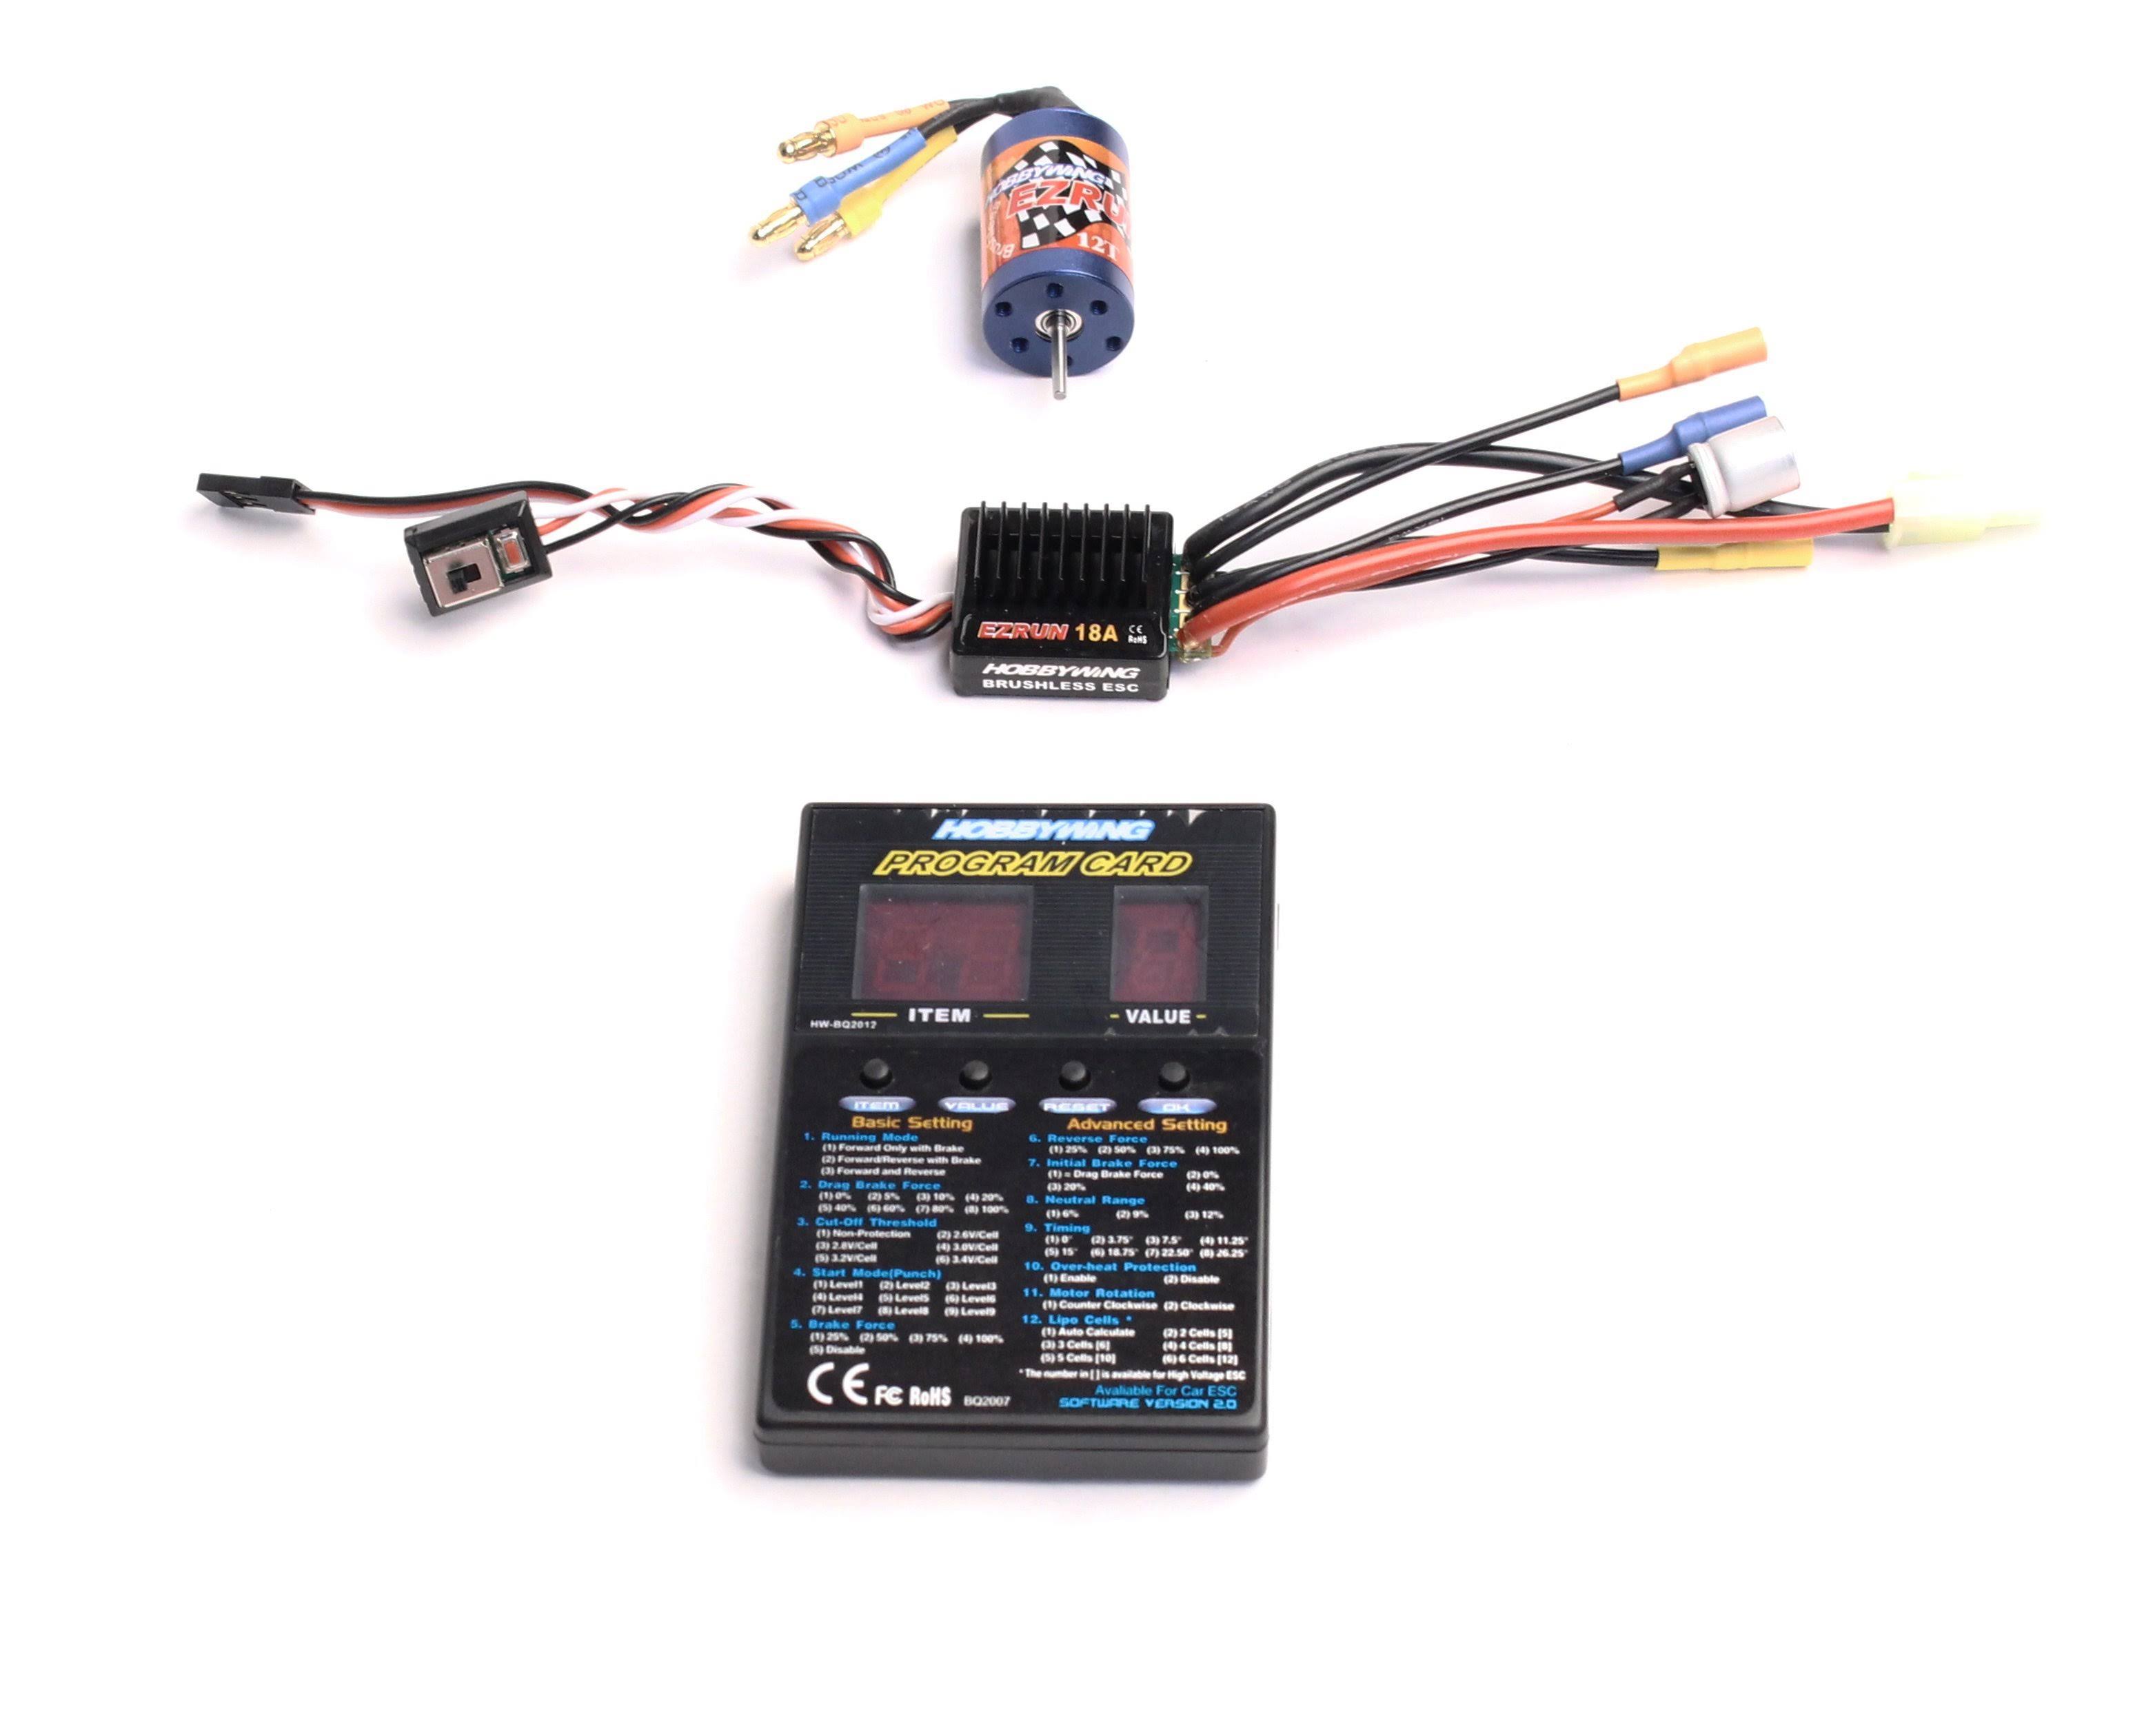 Hobbywing Brushless Motor and Speed Controller - 1/18 scale